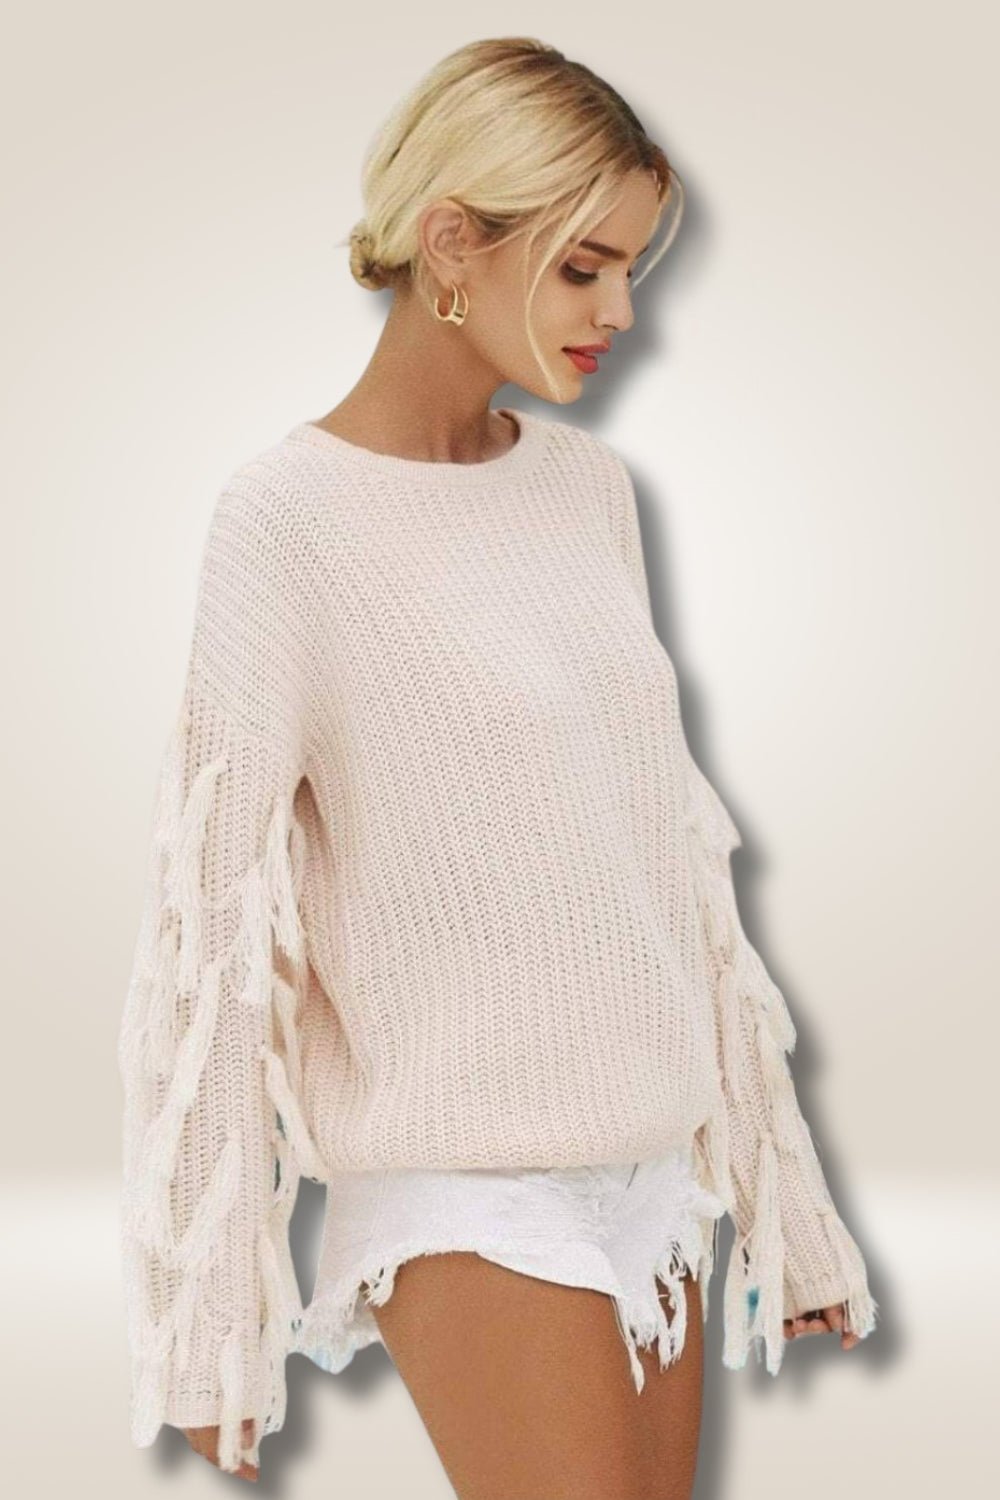 Comfy Fringe Knit Pink Sweater - TGC Boutique - Sweaters